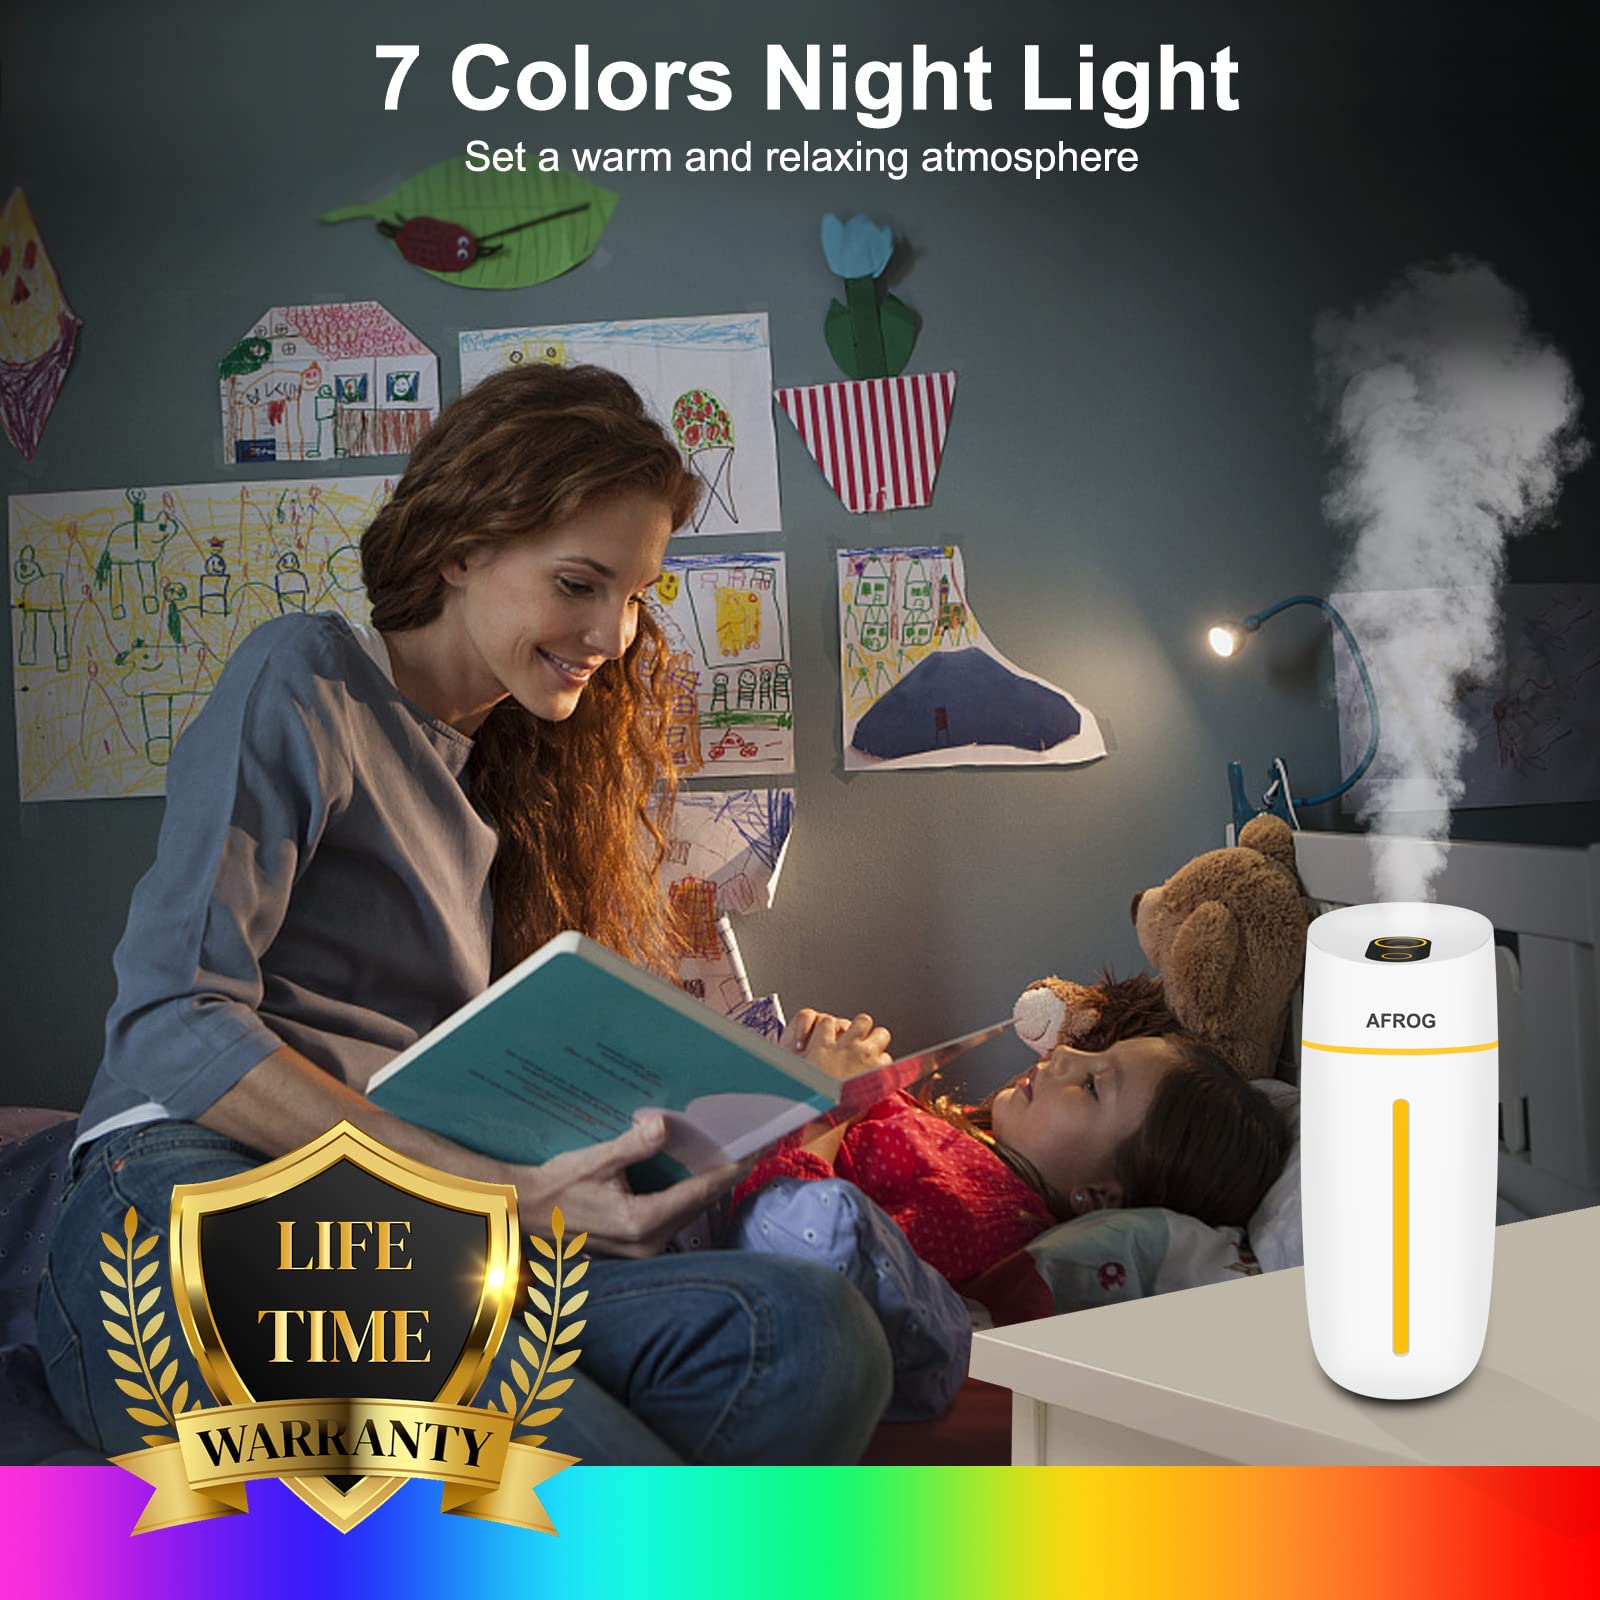 Portable Mini Humidifier, Small Cool Mist Humidifier with Night Light, USB Personal Desktop Humidifier for Baby Bedroom Travel Office Home, Auto Shut-Off, 2 Mist Modes, Super Quiet, with Adapter